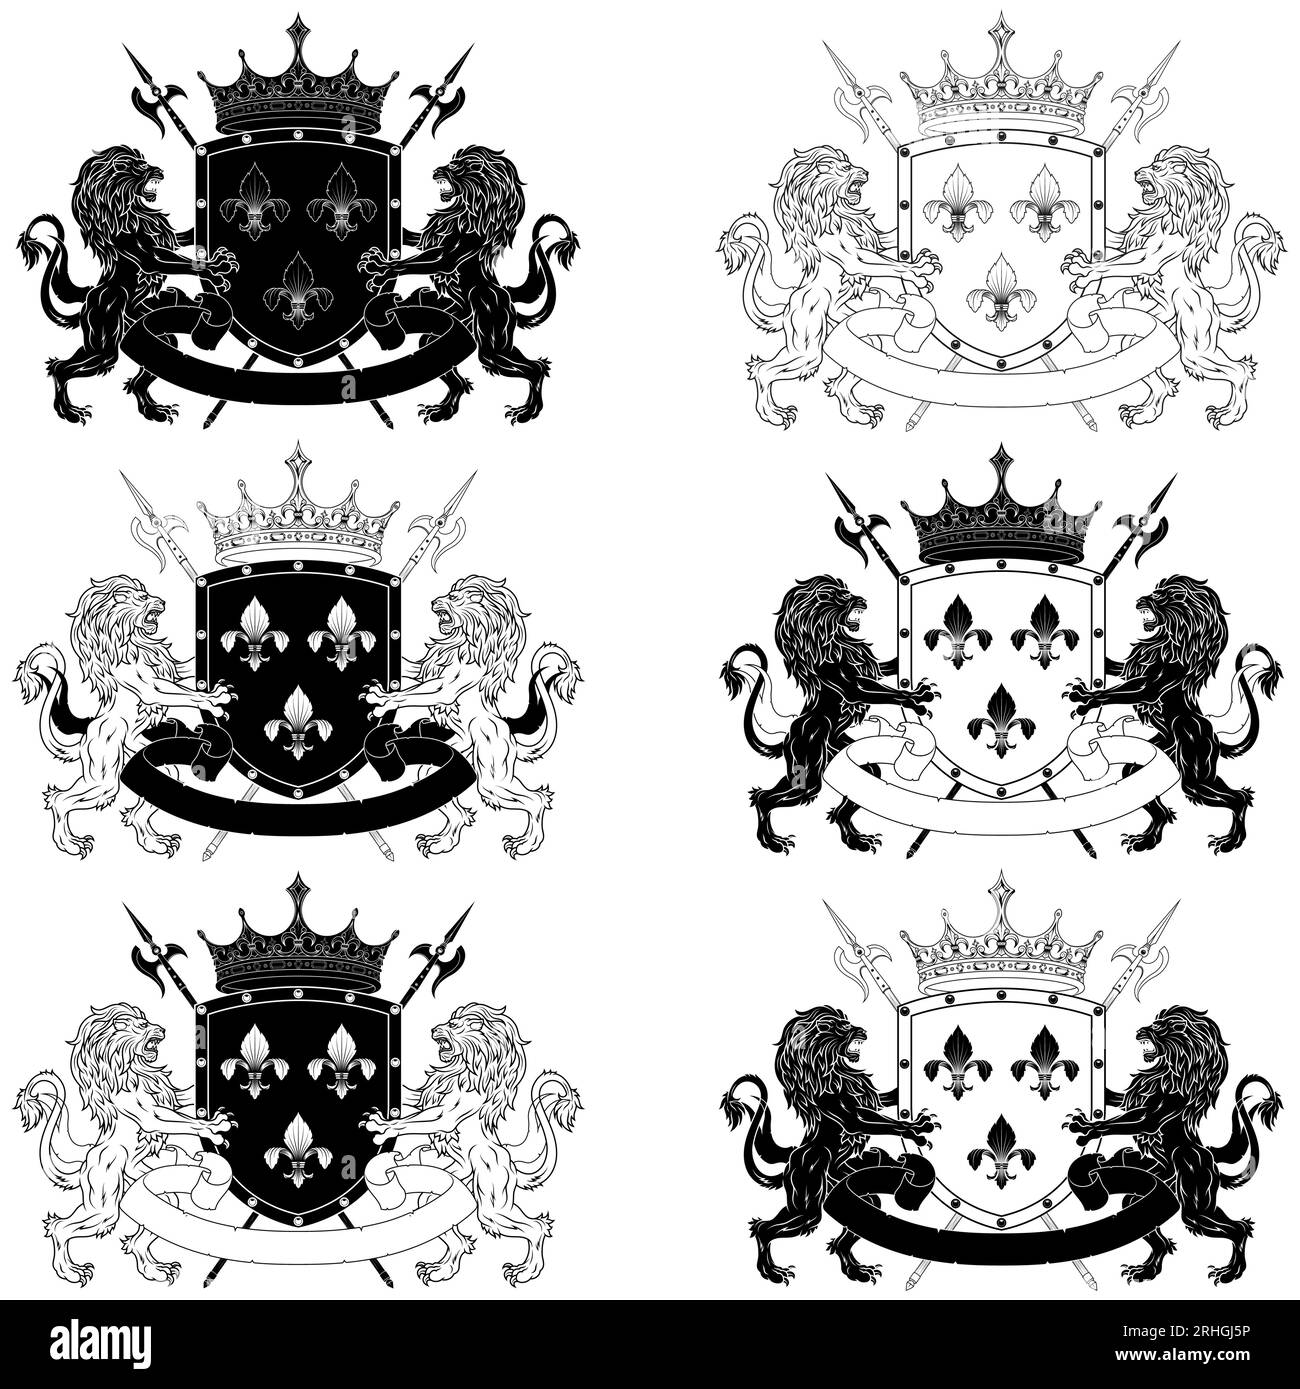 Crowned heraldic shield with three silver fleur-de-lys, flanked by two rampant lions and halberds Stock Vector